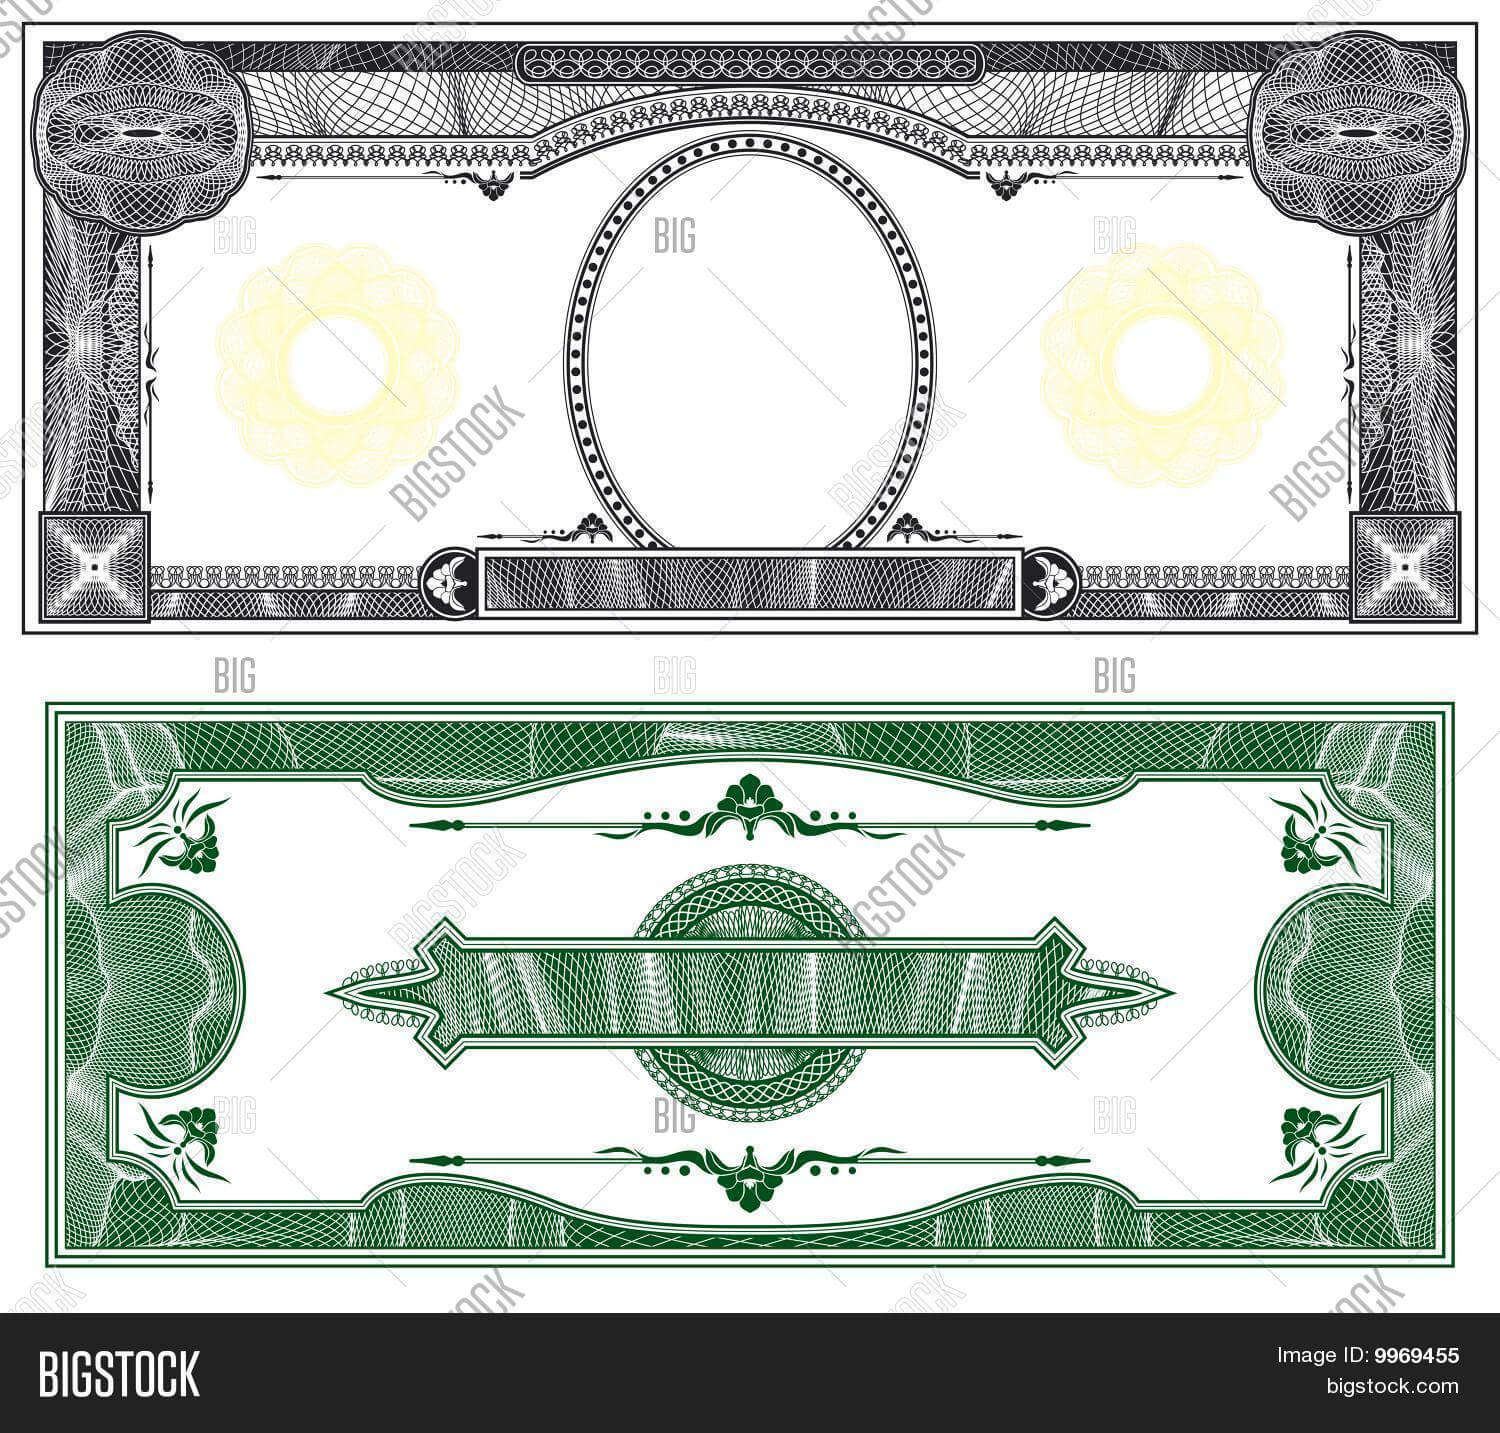 Blank Banknote Layout Image & Photo (Free Trial) | Bigstock With Regard To Bank Note Template